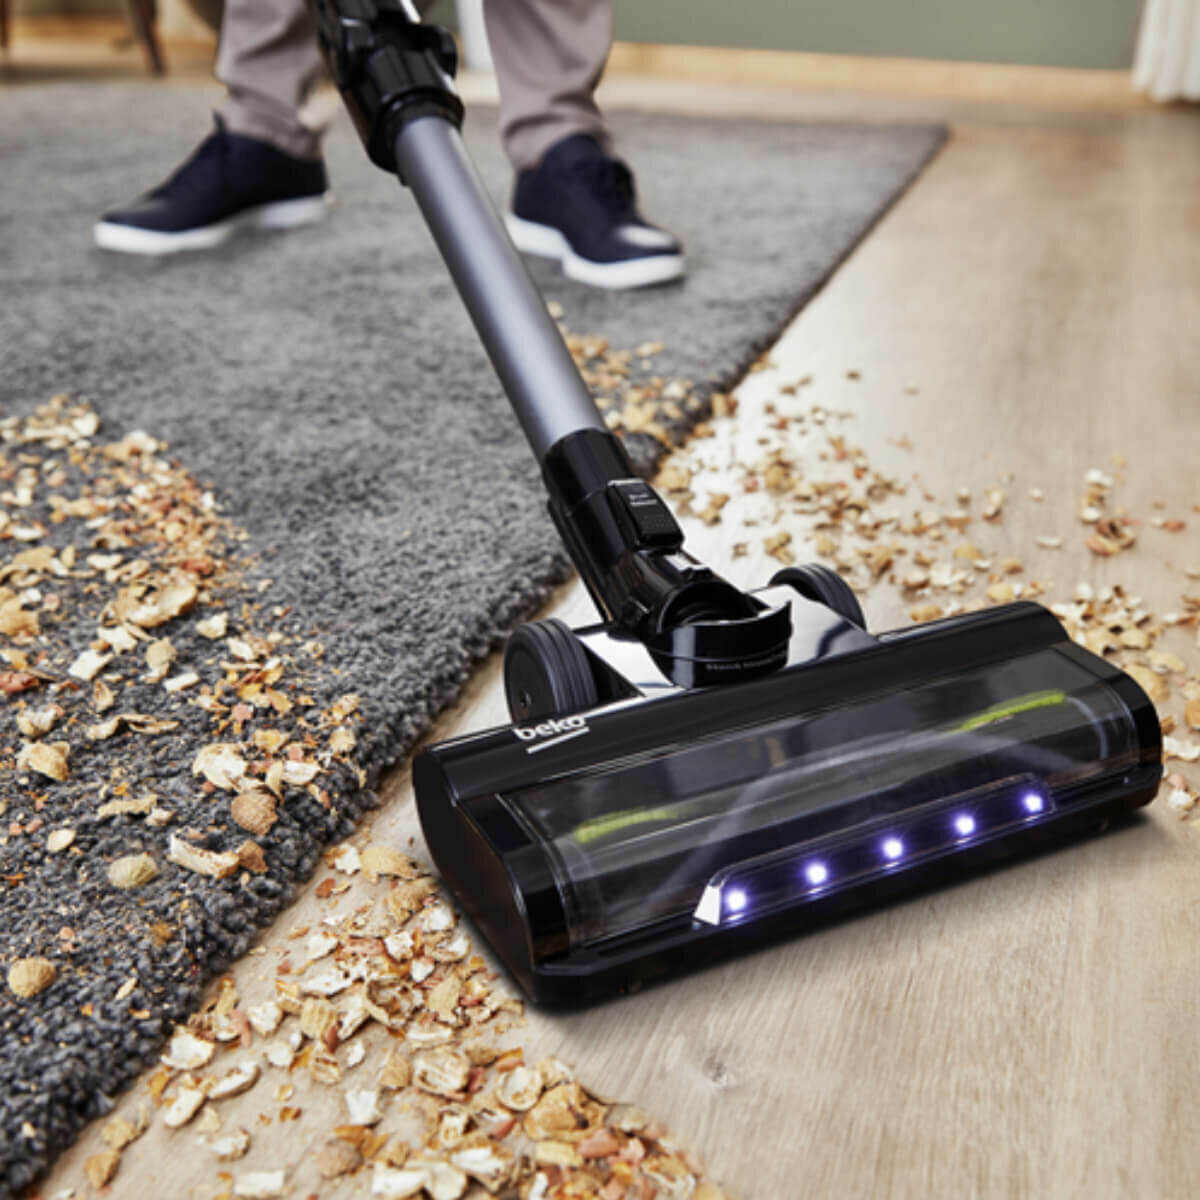 Electrolux Stick Vacuum Cleaners